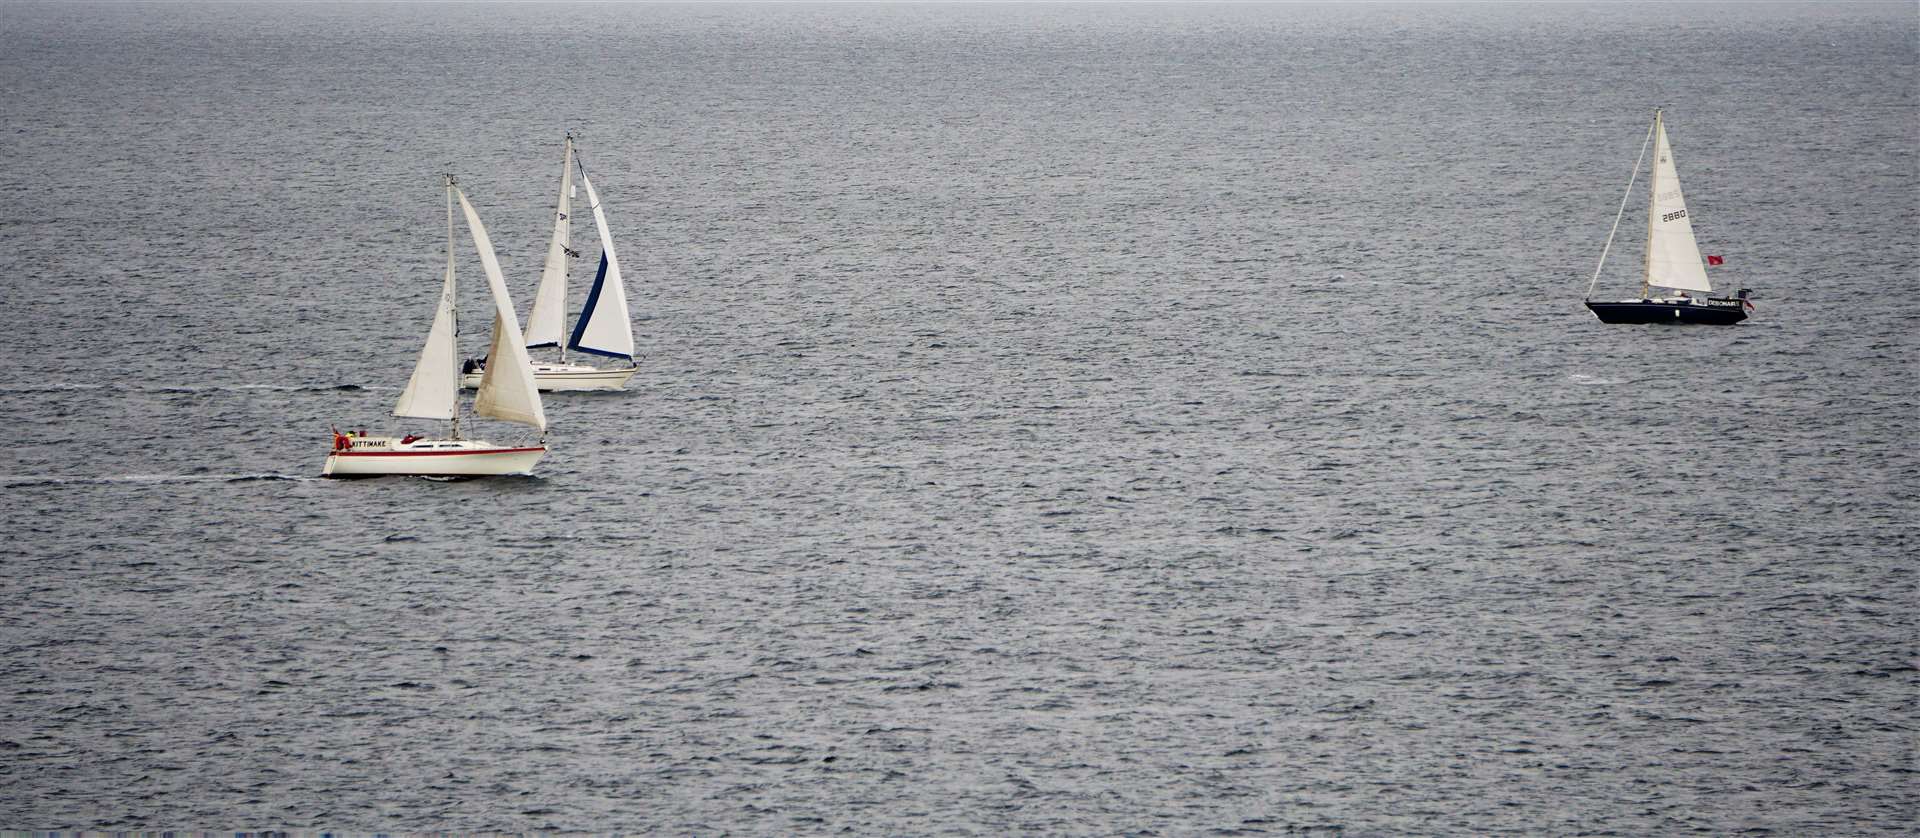 The yachts sailed around a buoy in Sinclair's Bay before heading back to Wick. Picture: DGS